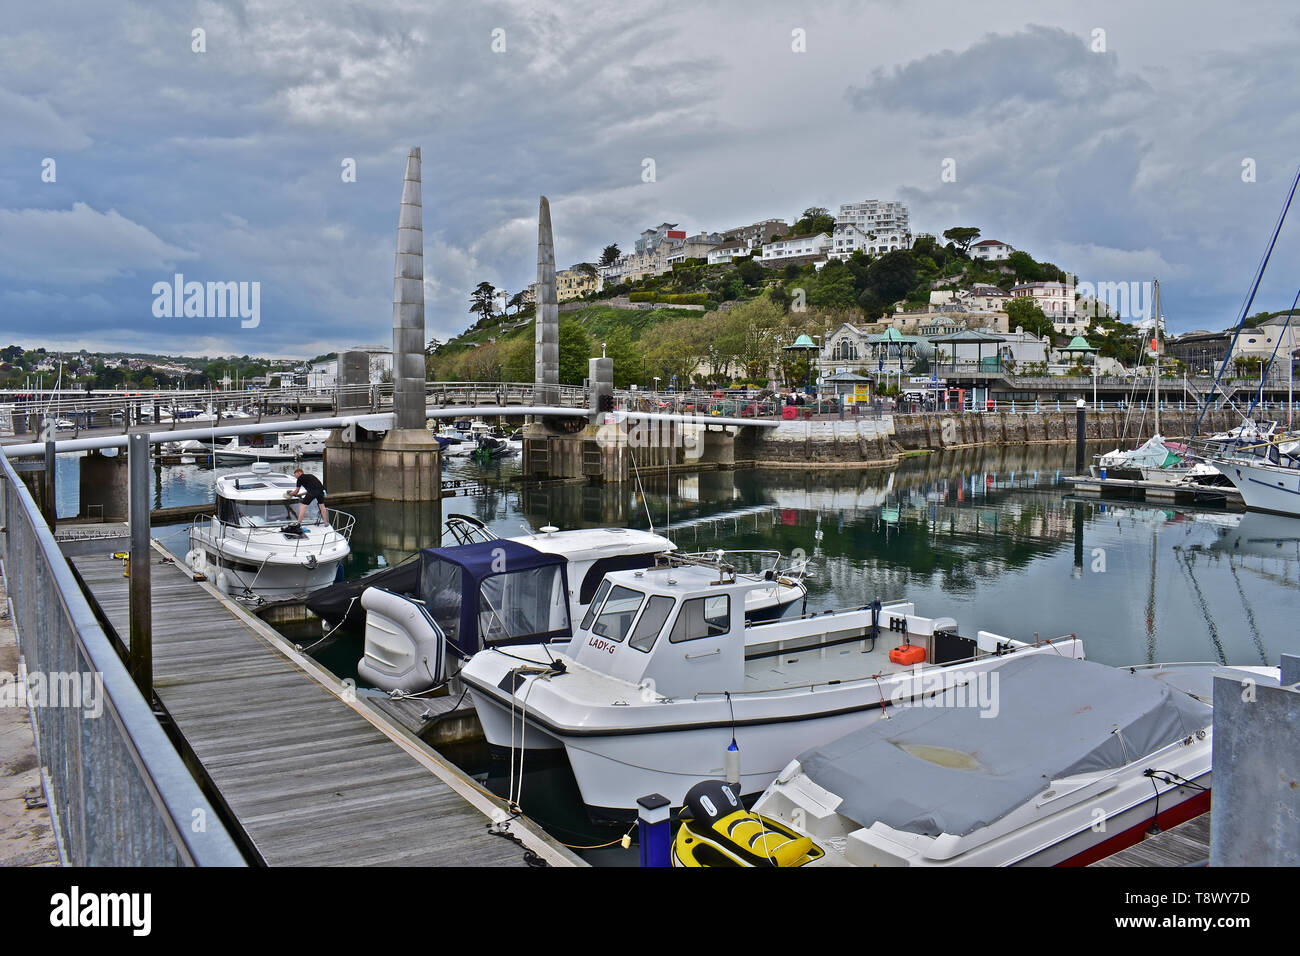 A view across the inner harbour/ marina at Torquay with yachts at moorings. Calm still waters with reflections of boats and buildings on the hillside. Stock Photo